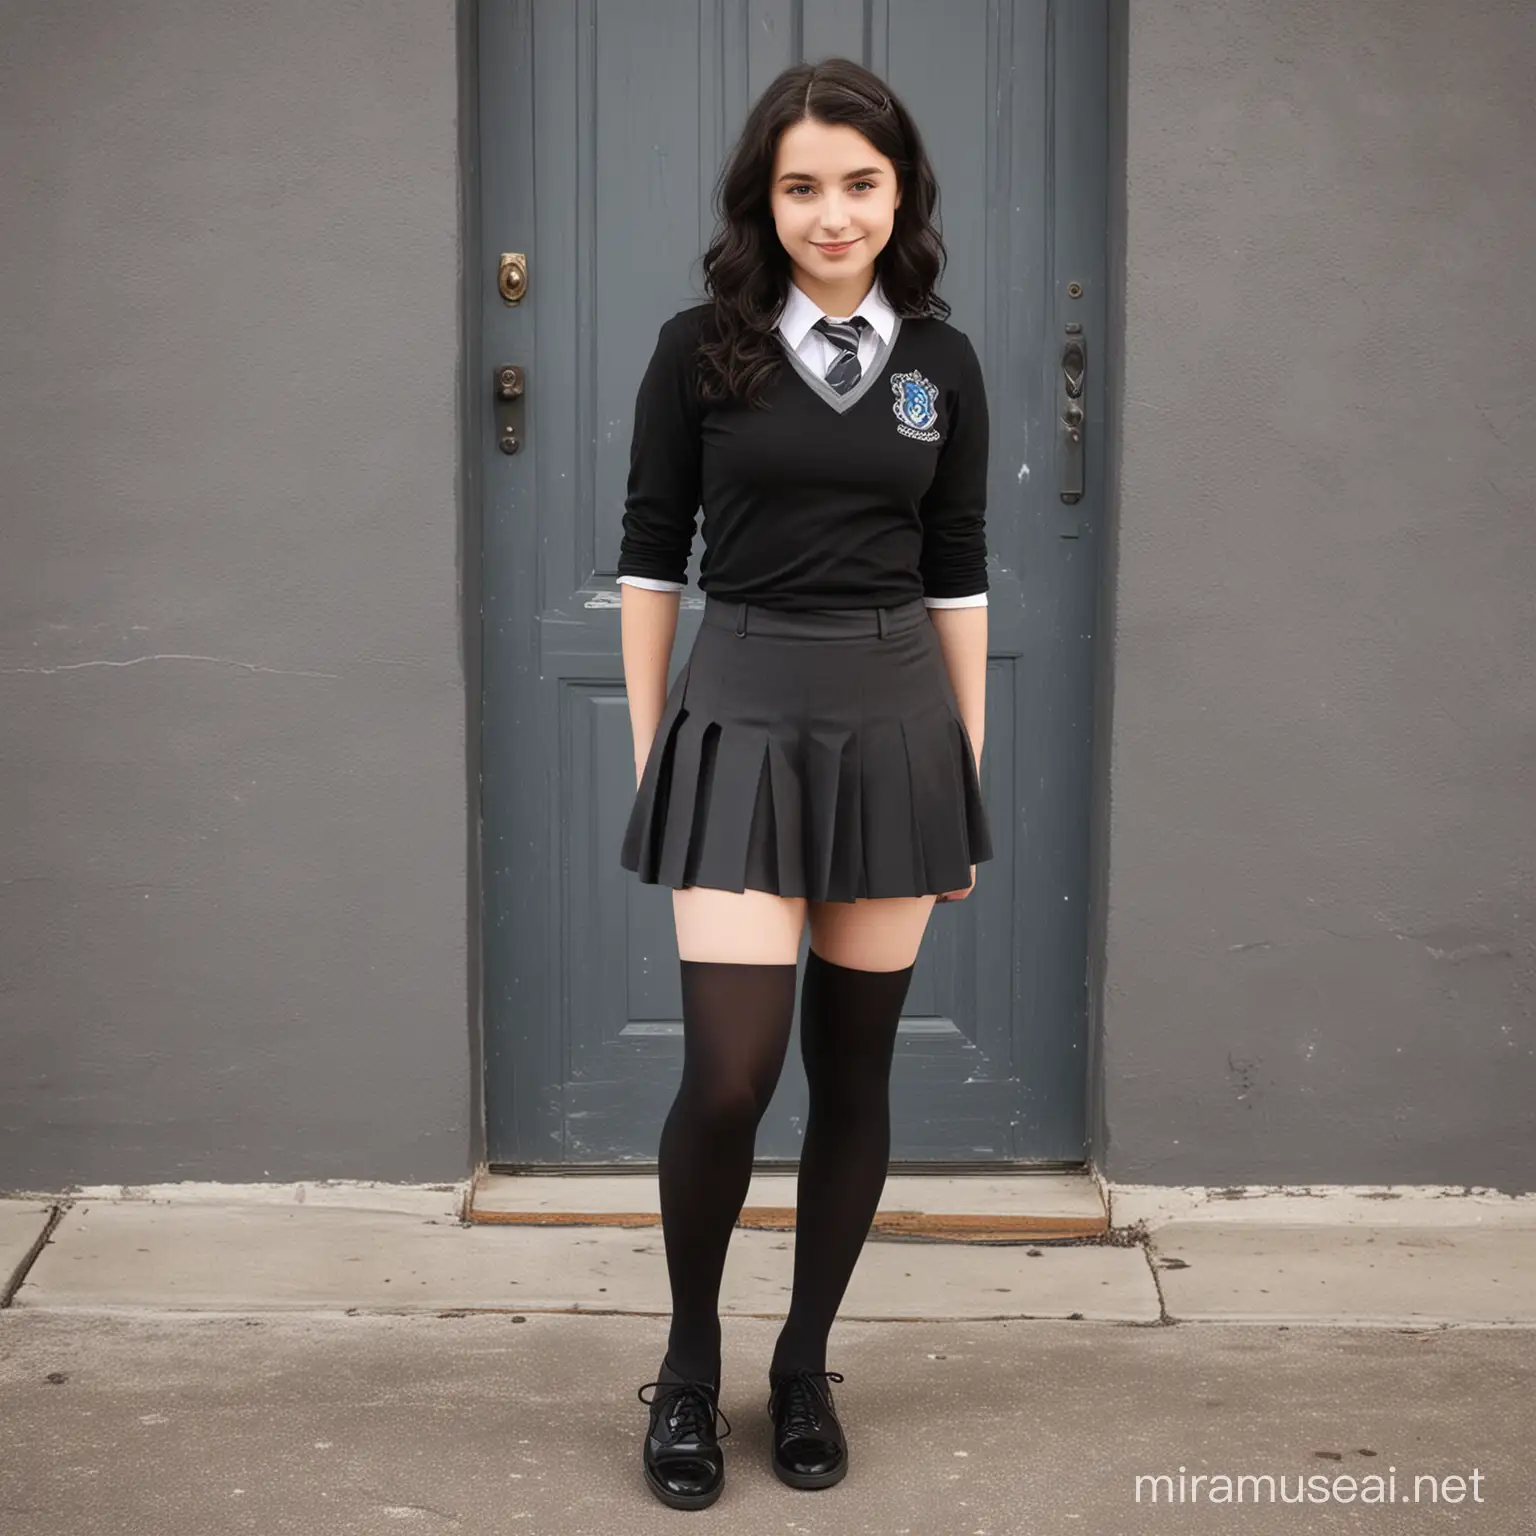 Ravenclaw Teen Wearing Hogwarts Uniform in Mysterious Ambiance